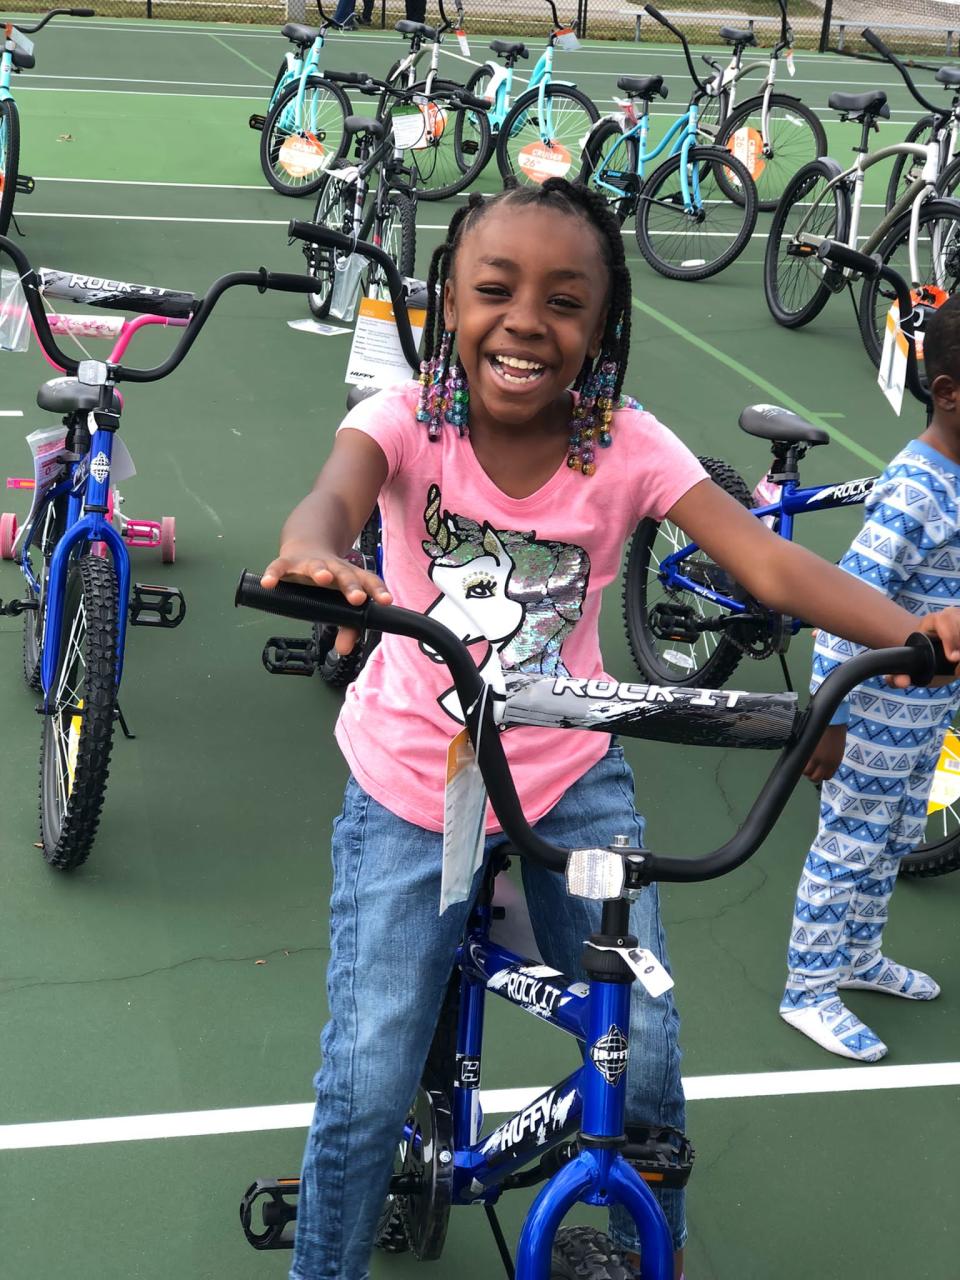 A girl was all smiles as she hopped on her new bike for the first time at last year's annual Christmas bike giveaway in Daytona Beach.